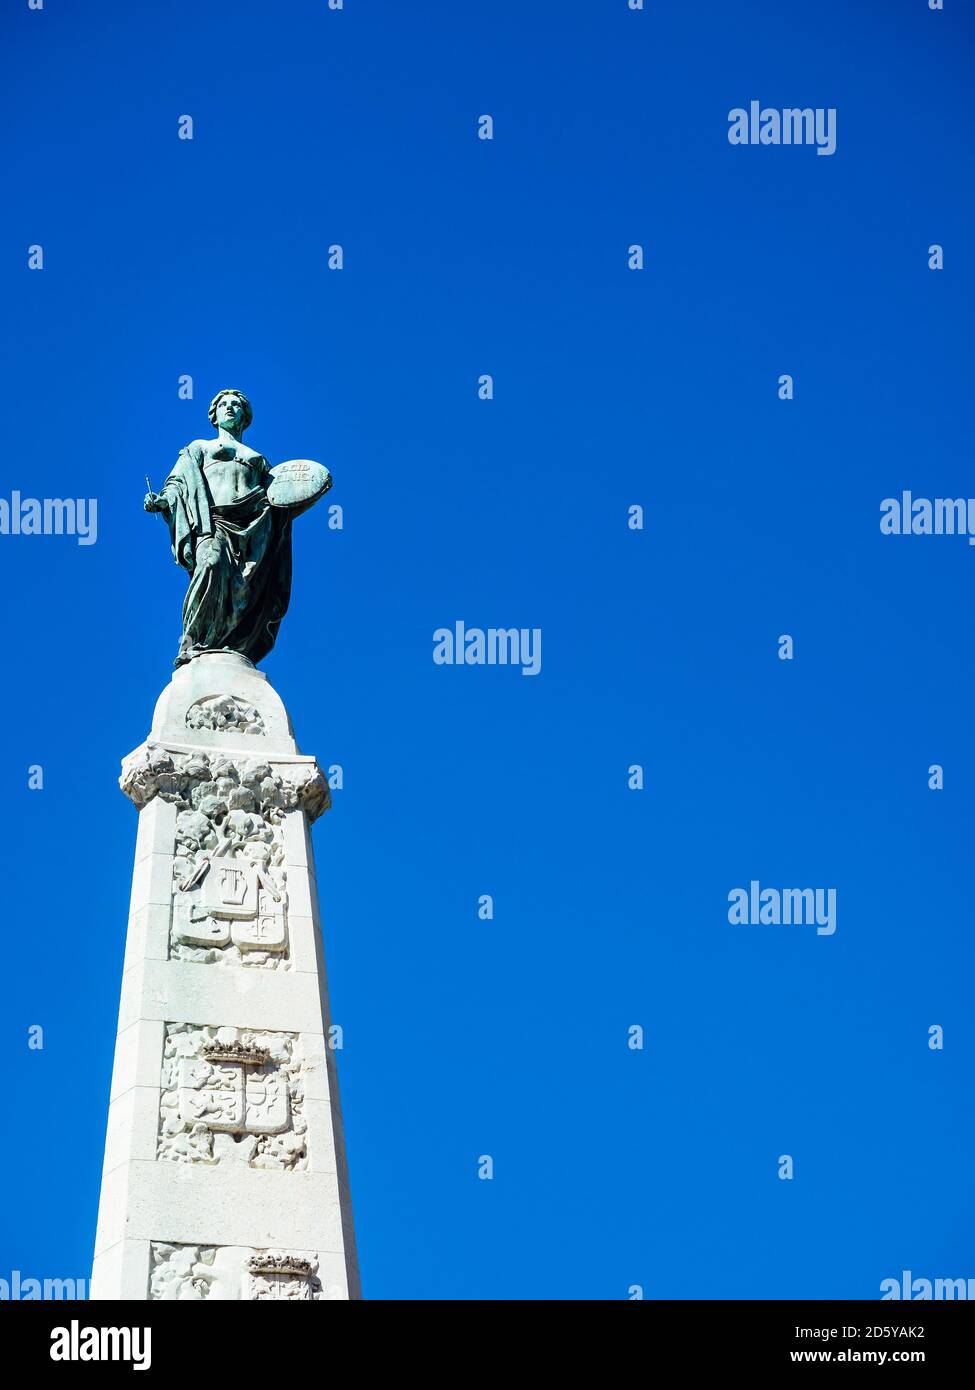 Germany, Frankfurt, Unity Monument at St Paul's Square in front of blue sky Stock Photo